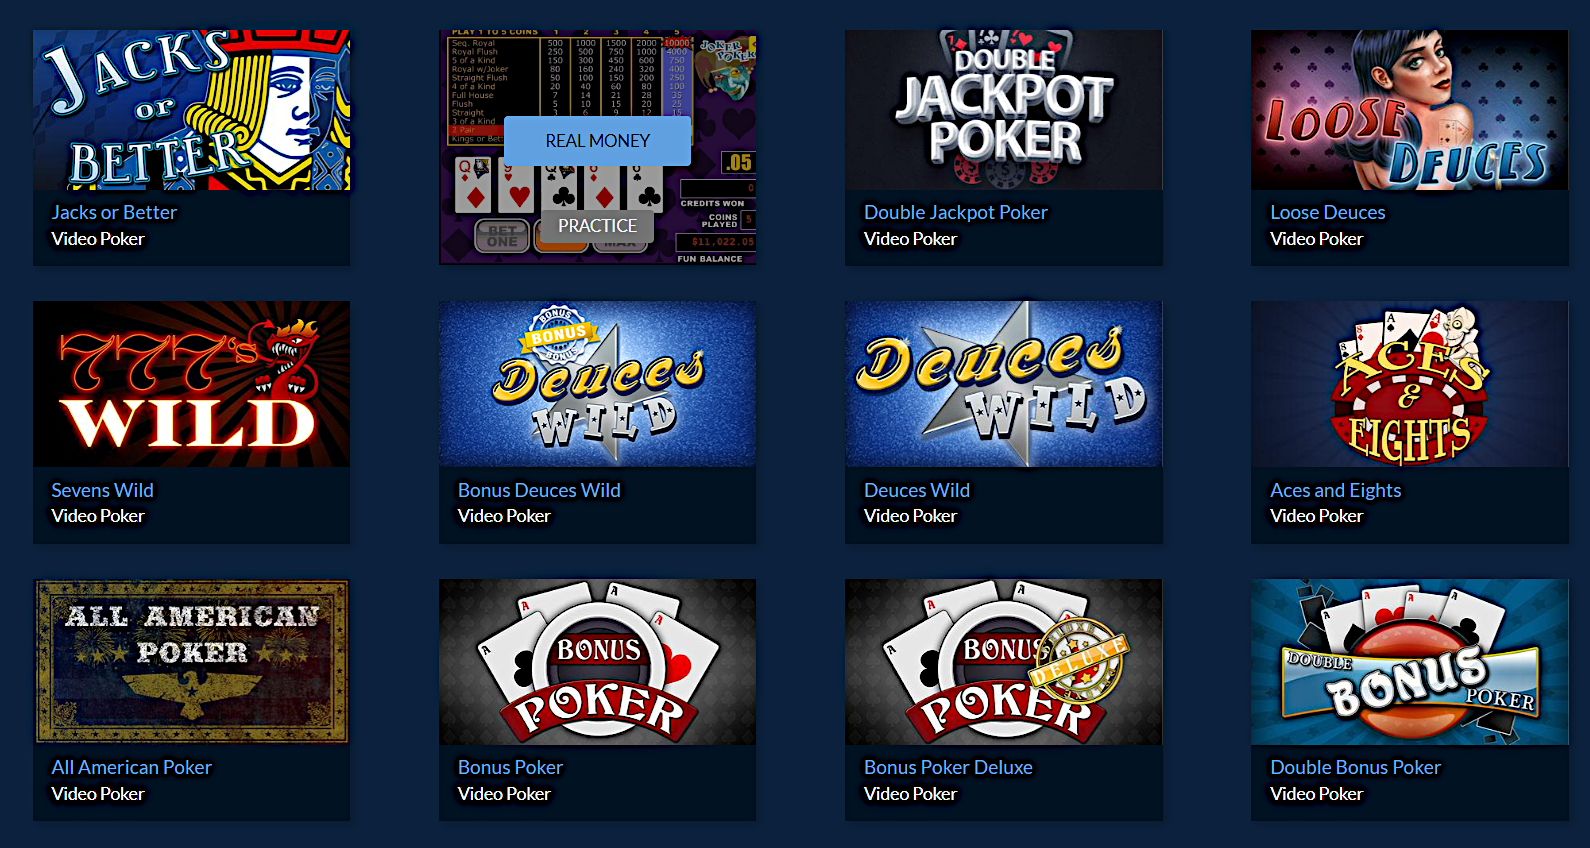 Punt Casino horse racing slots and games include the entire video poker menu in honor of Poker Party, a contender for the Grand National 2022.